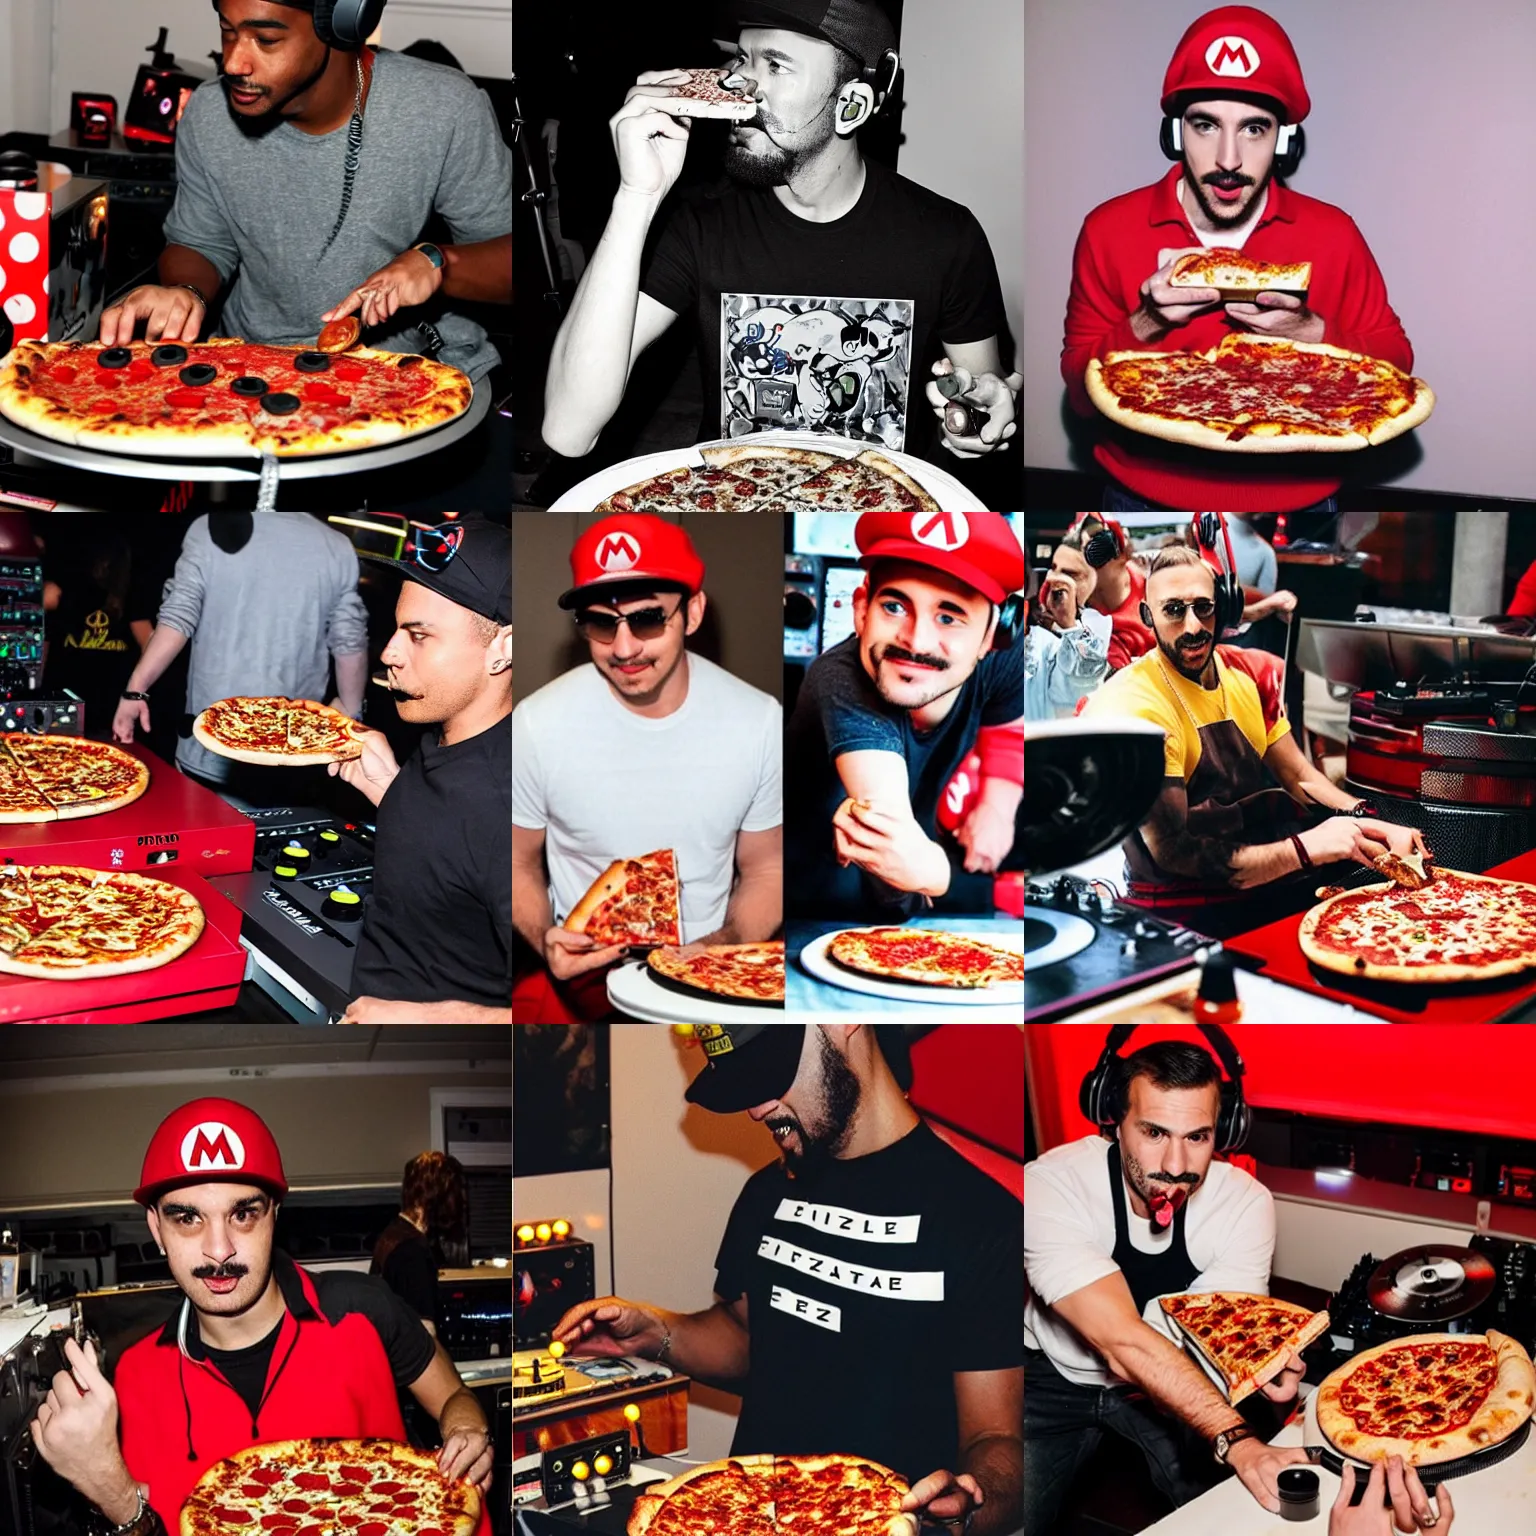 Prompt: Mario eating pizza while wearing heaphones DJing with DJ turntables, unreal